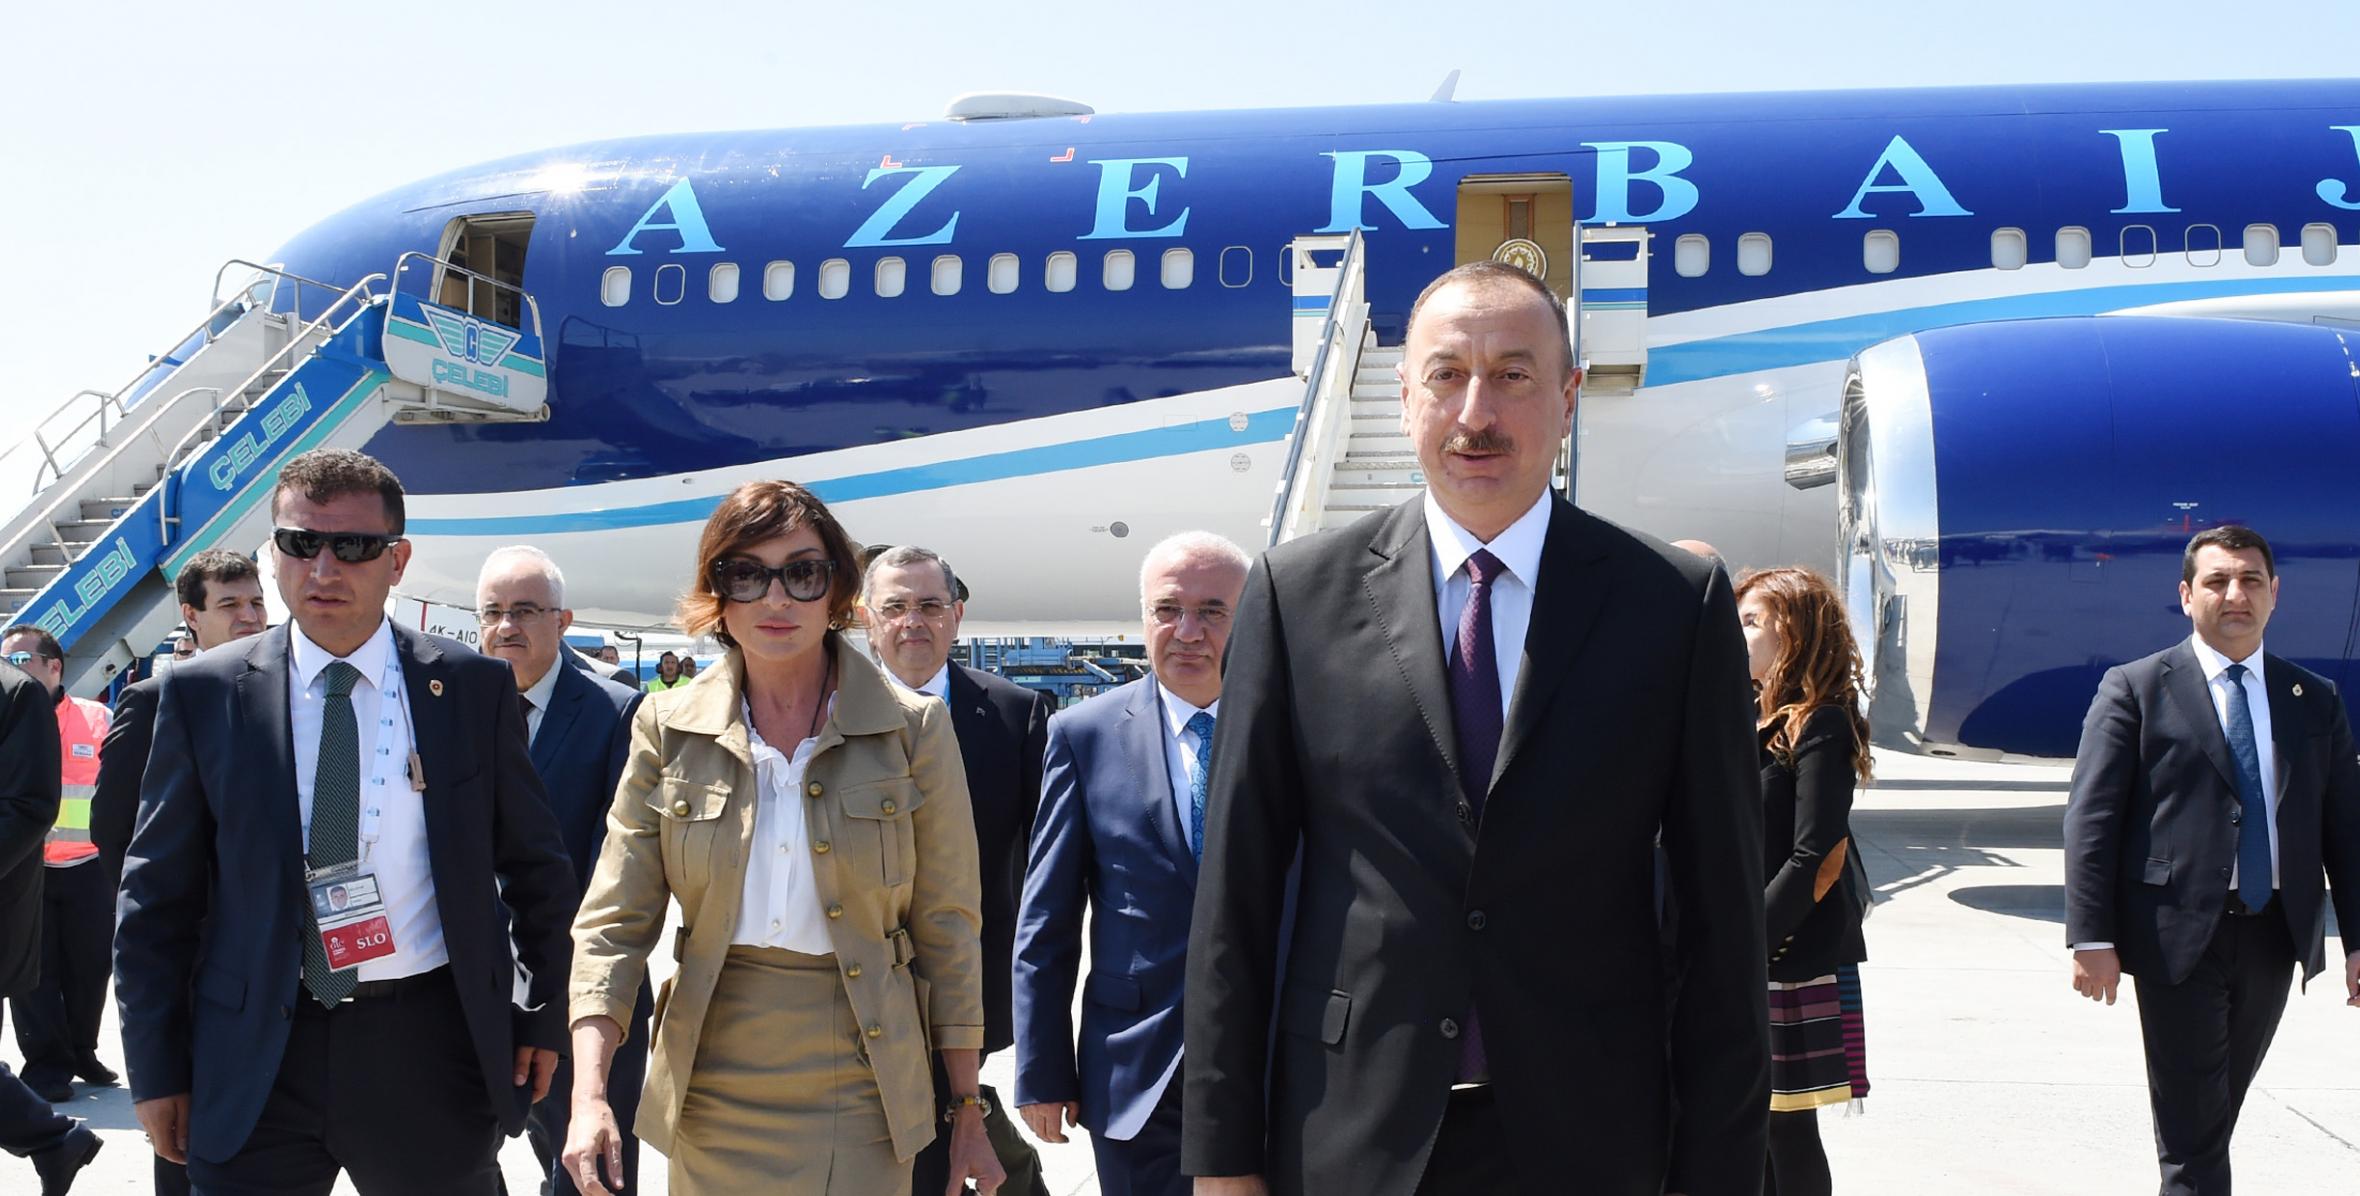 Ilham Aliyev arrived in Turkey for a working visit